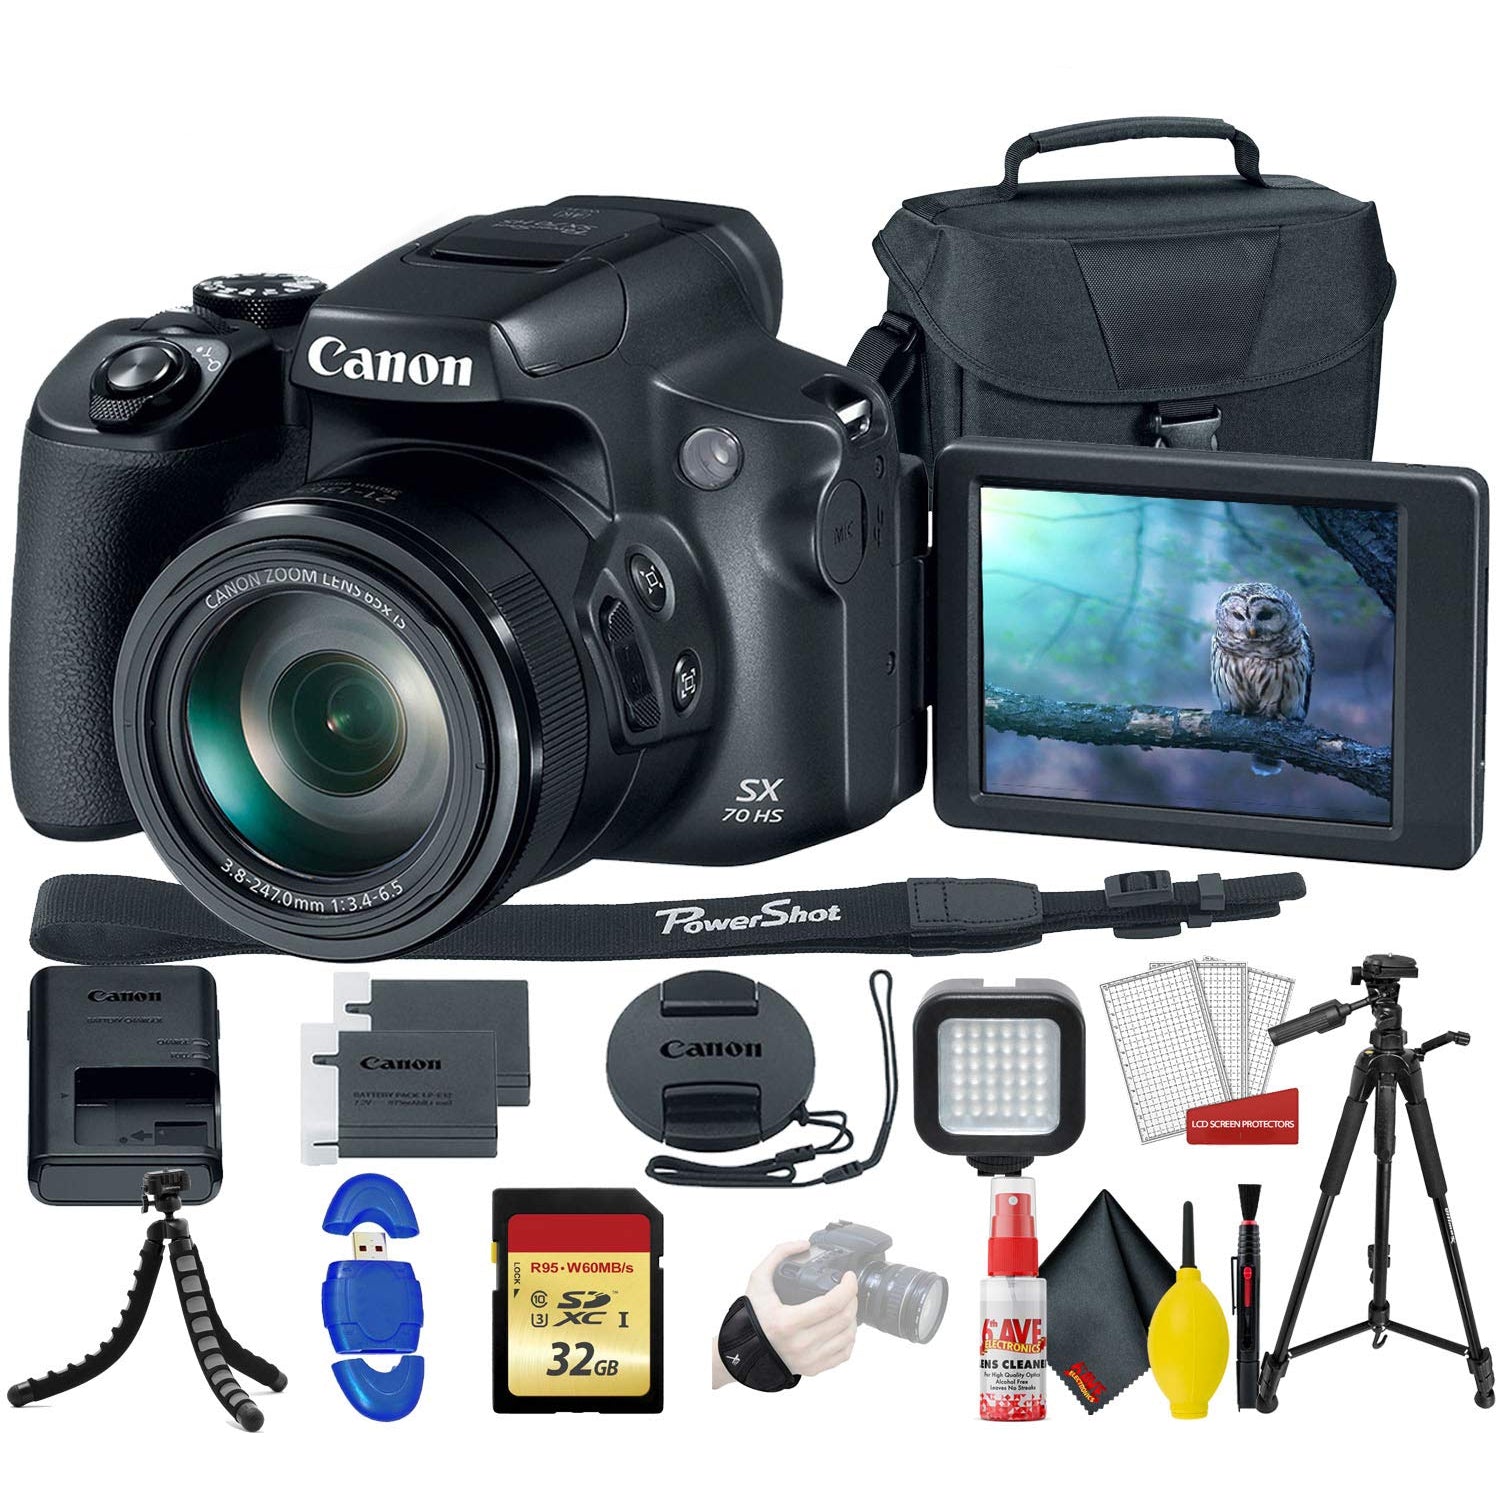 Canon PowerShot SX70 HS Digital Camera With 32GB Memory Card, Padded Case, Spider Tripod, LED Light, Extra Battery, Full Size Tripod,m Cleaning Kit,